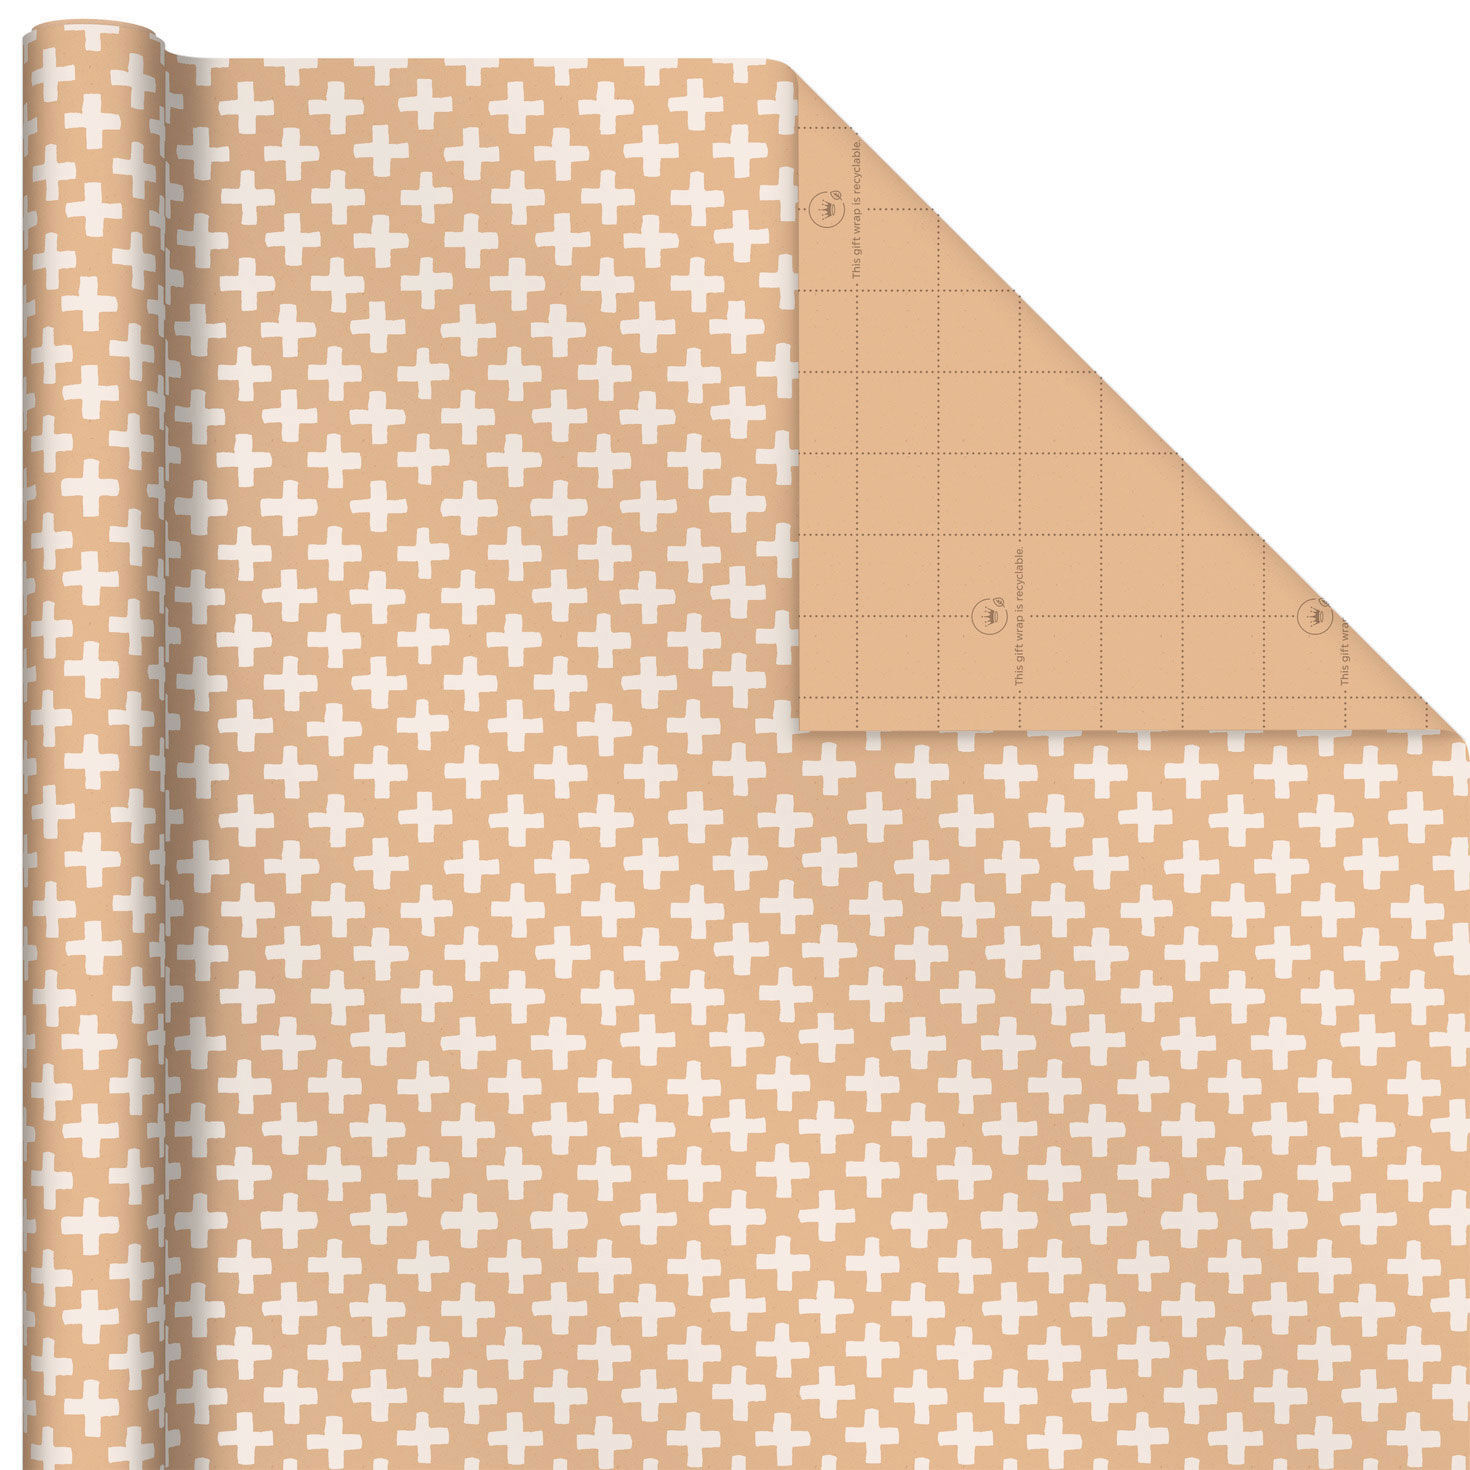 Plus Sign Kraft Wrapping Paper, 17.5 sq. ft. - Wrapping Paper - Hallmark